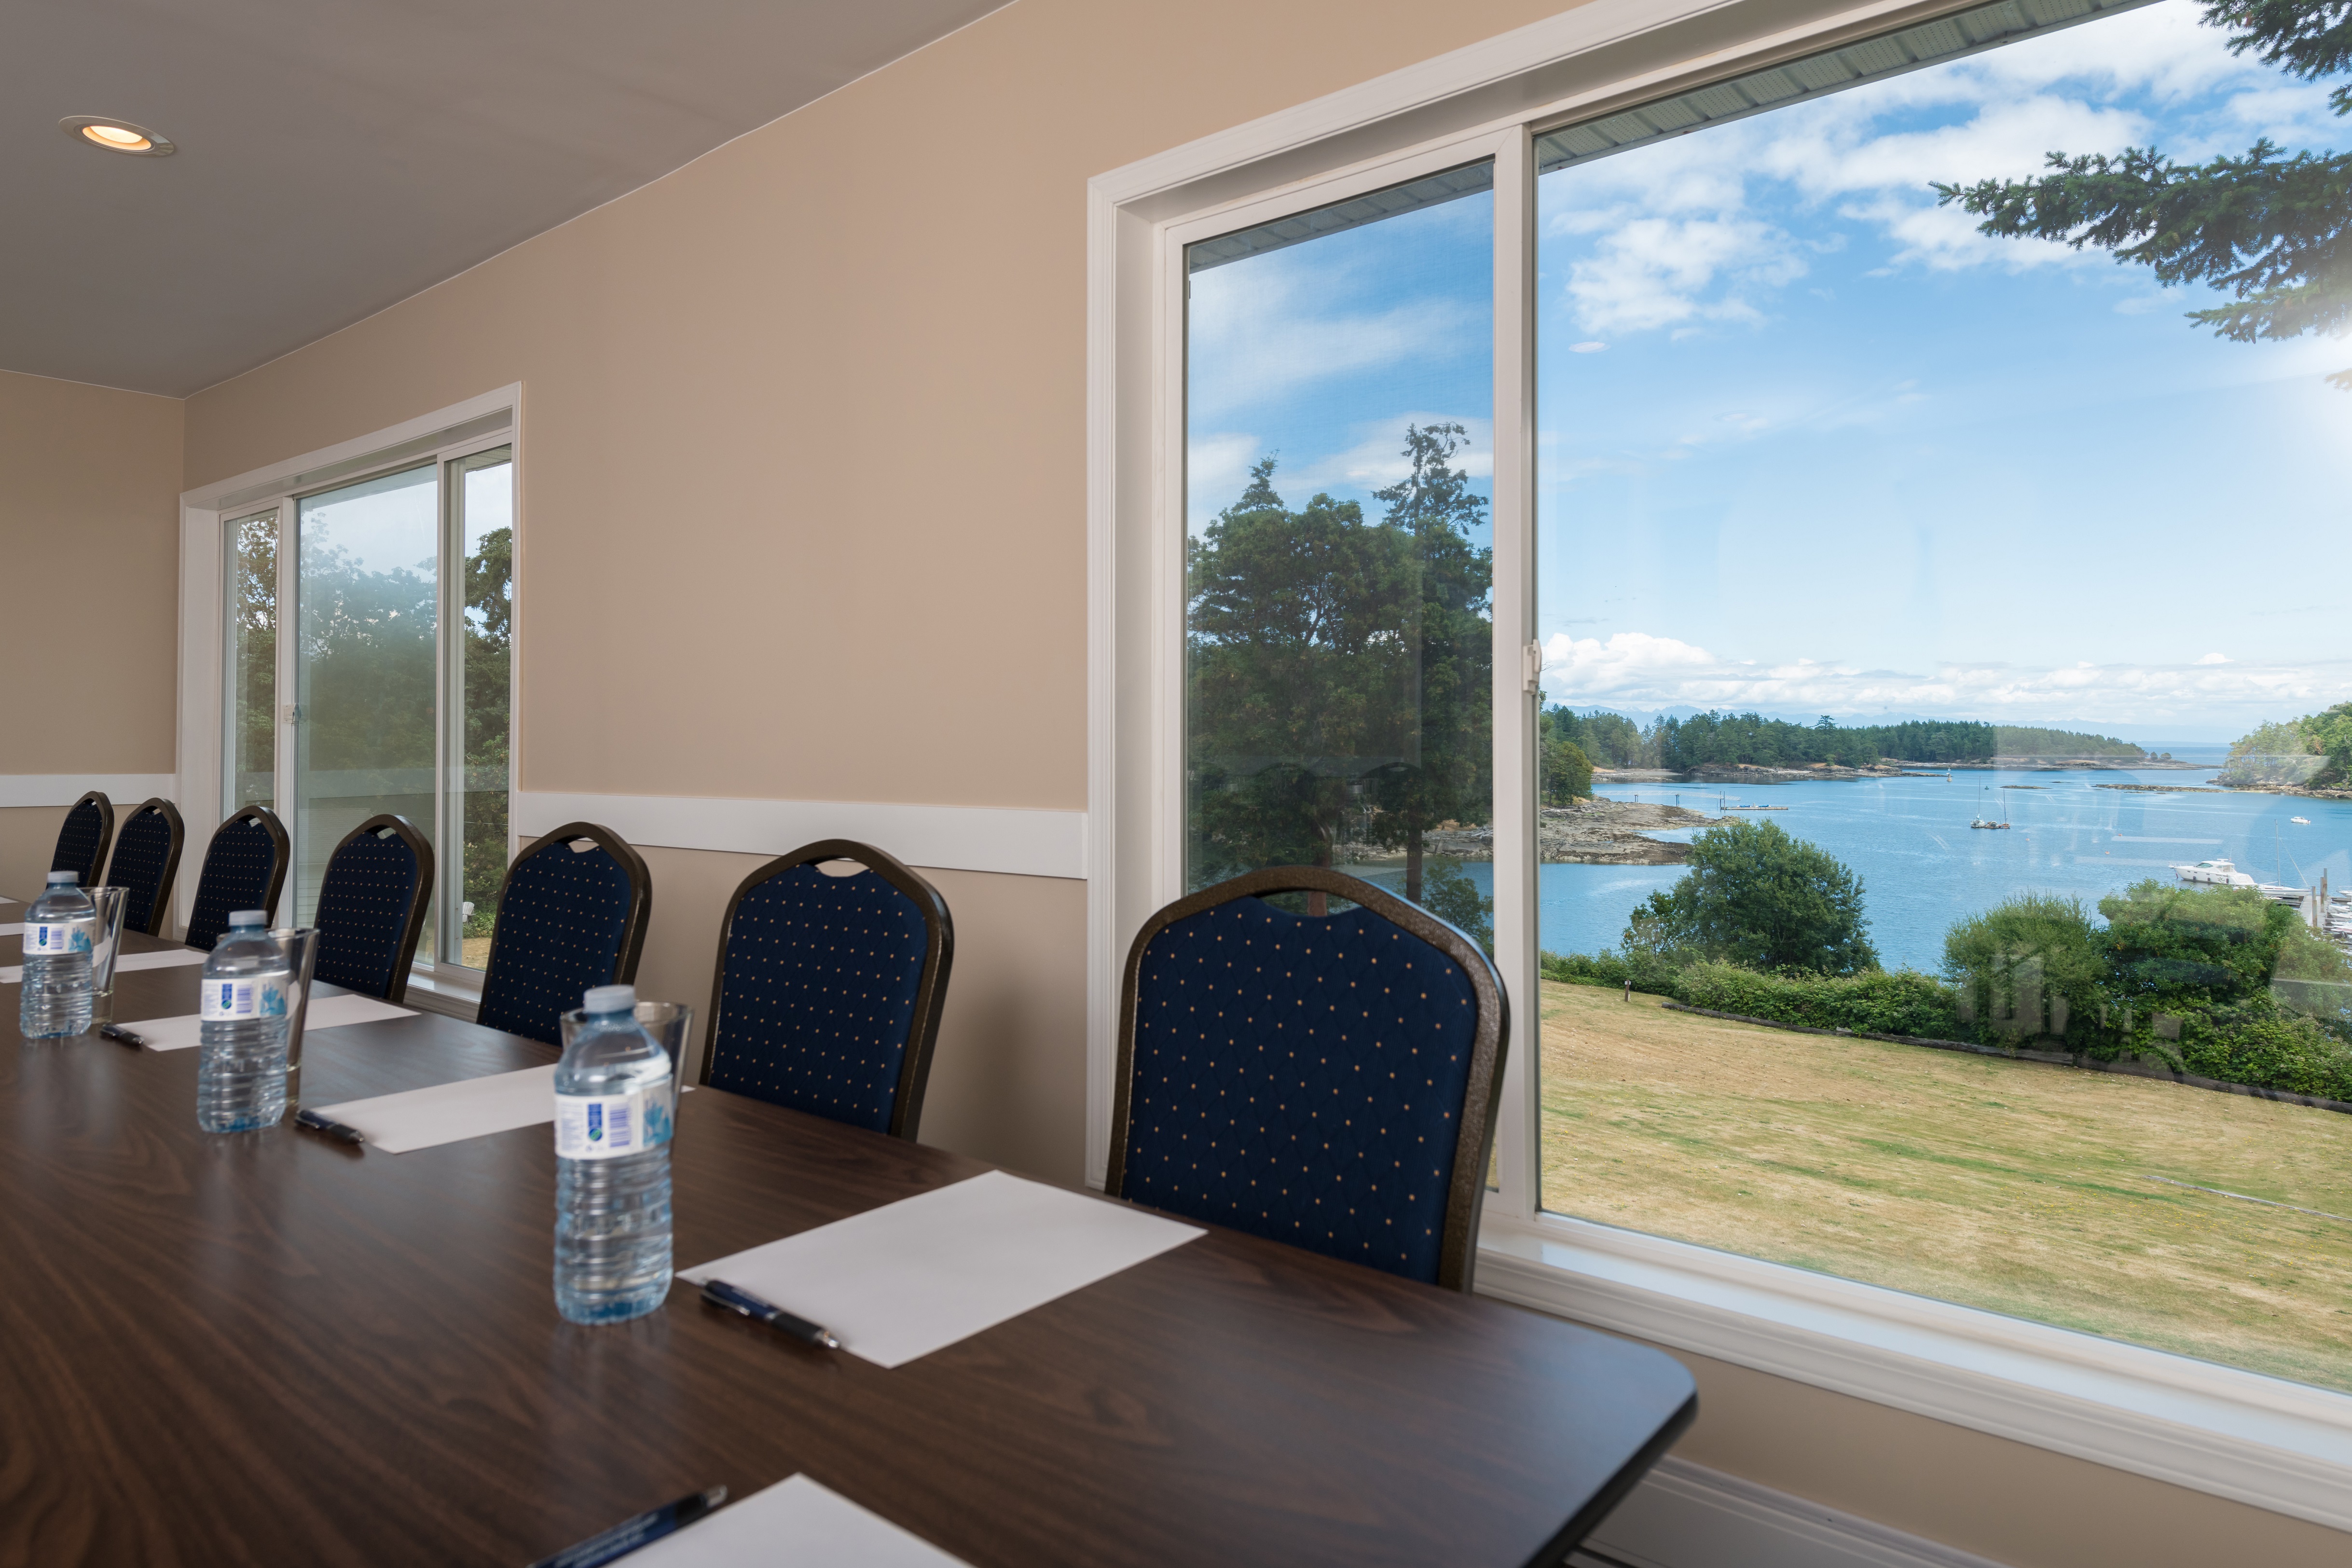 Meetingroom with a fabulous view of the bay